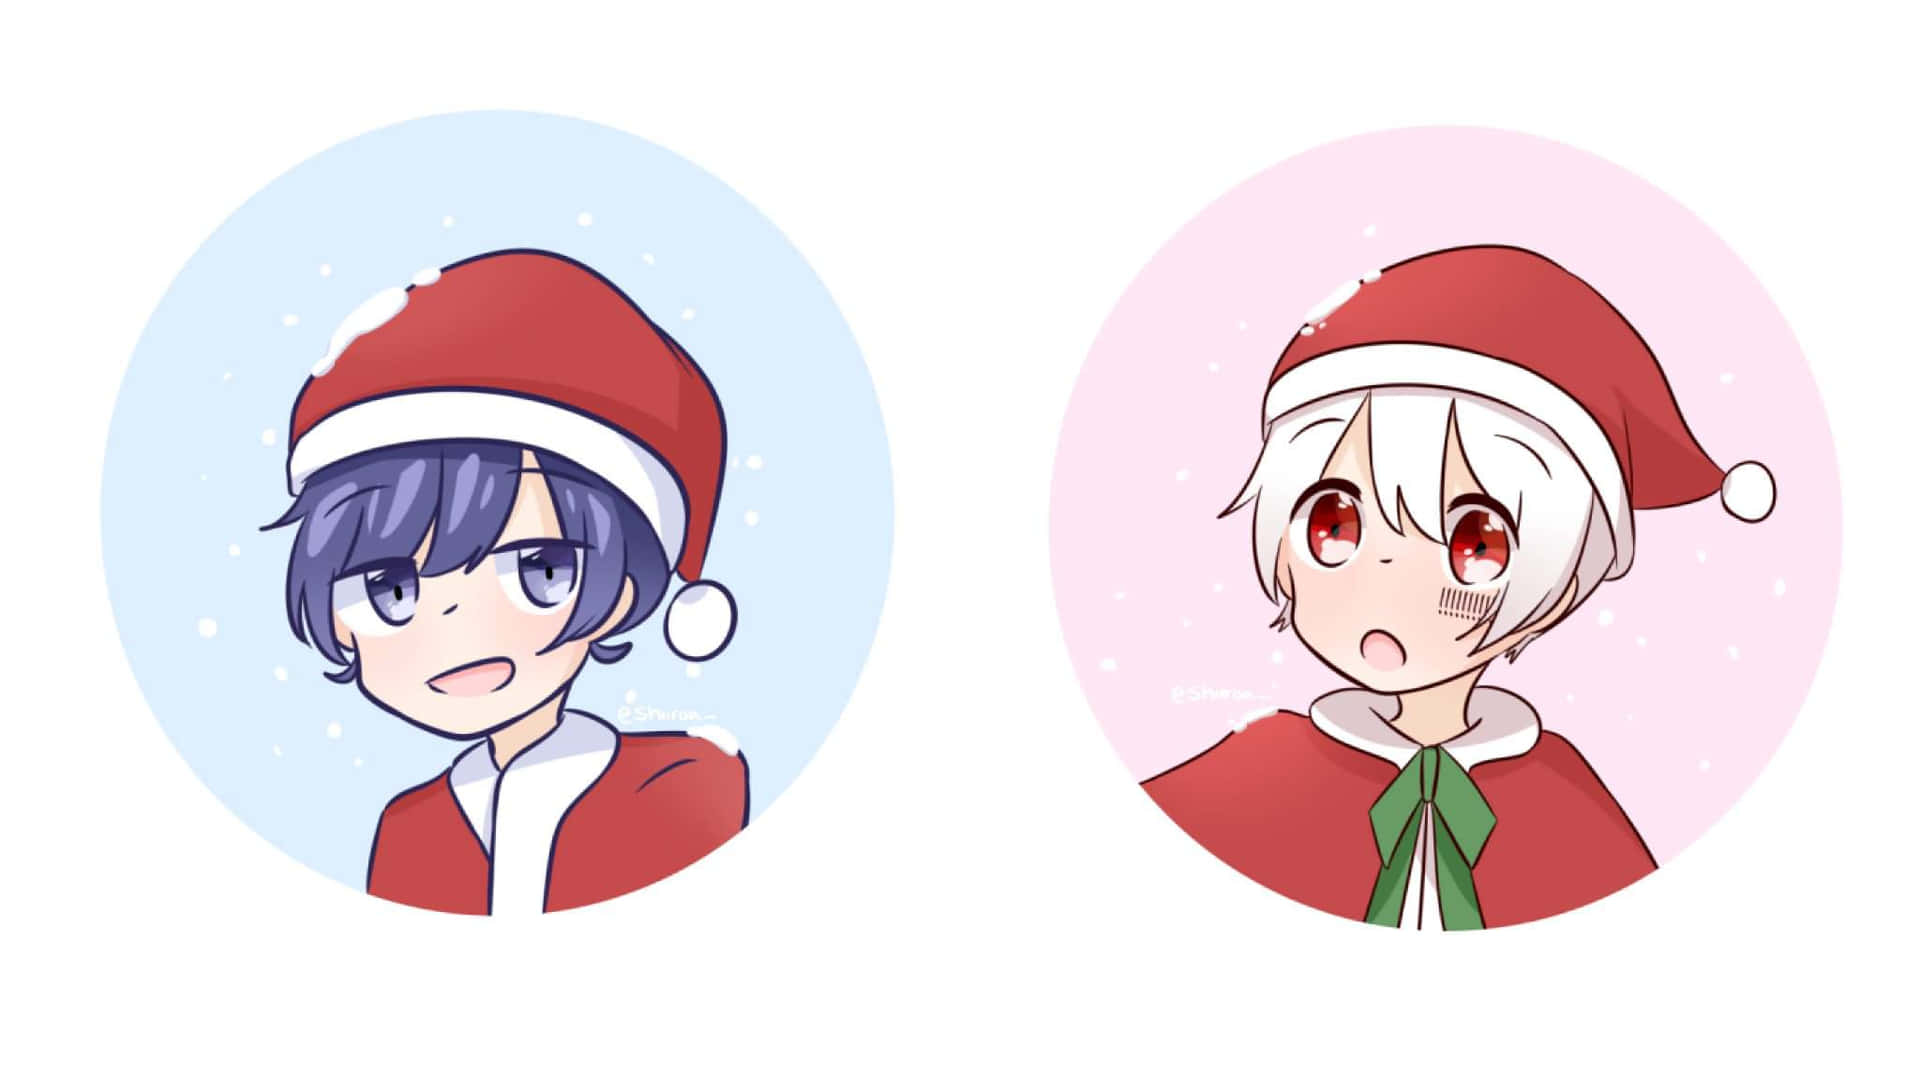 Celebrate Christmas with your Favorite Anime Characters